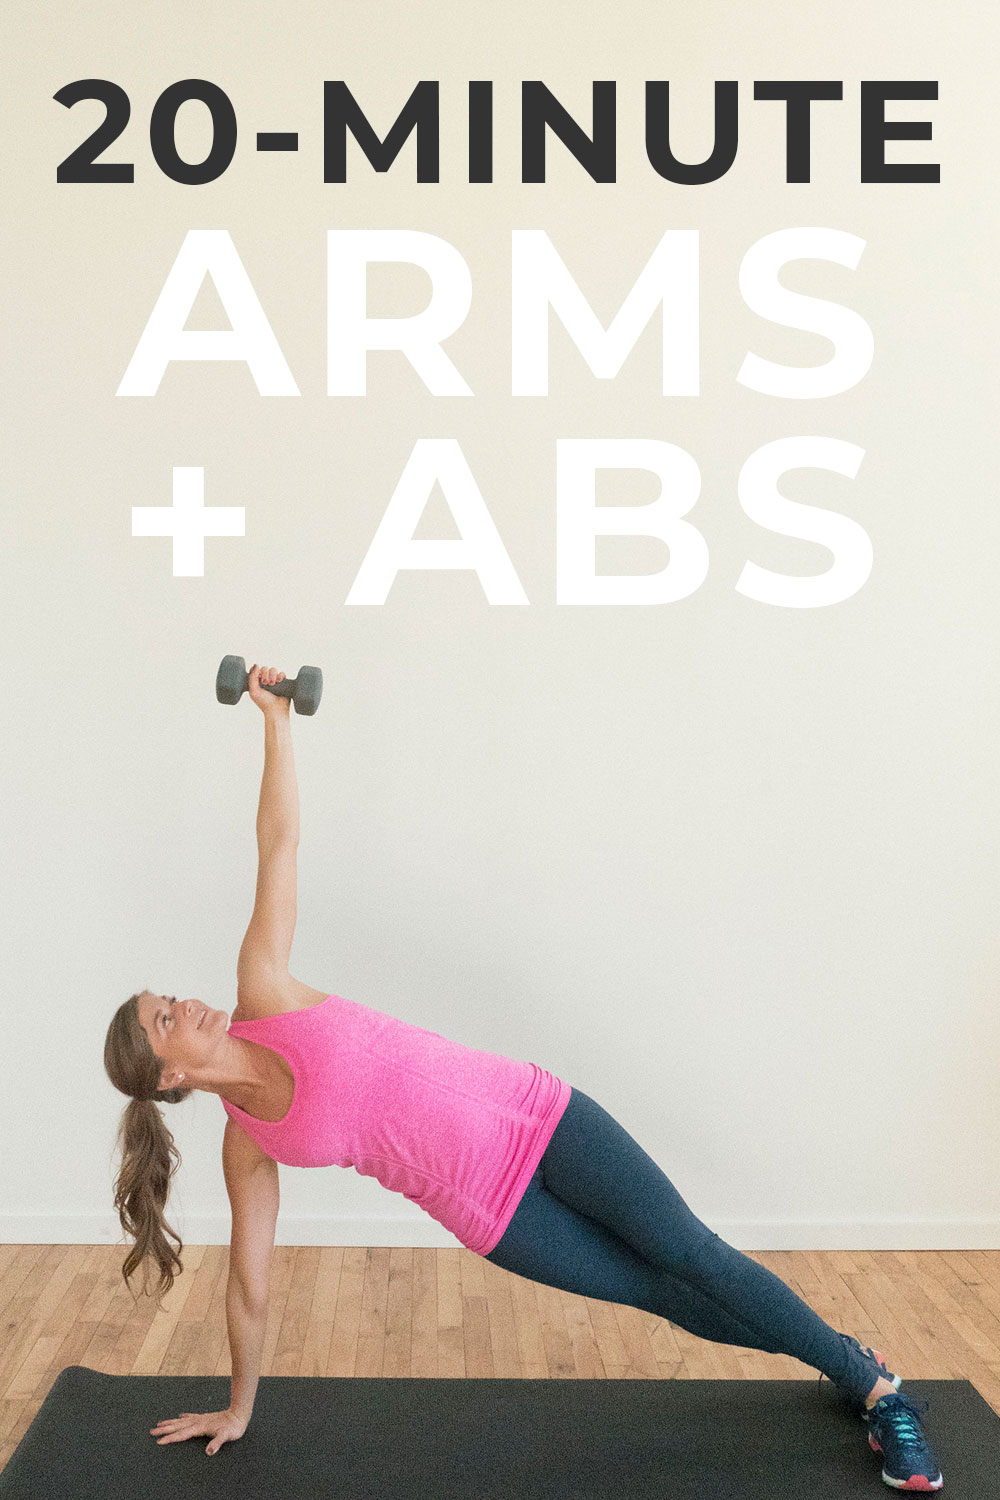 5 Day Lower Abs Exercise With Dumbbells for Beginner